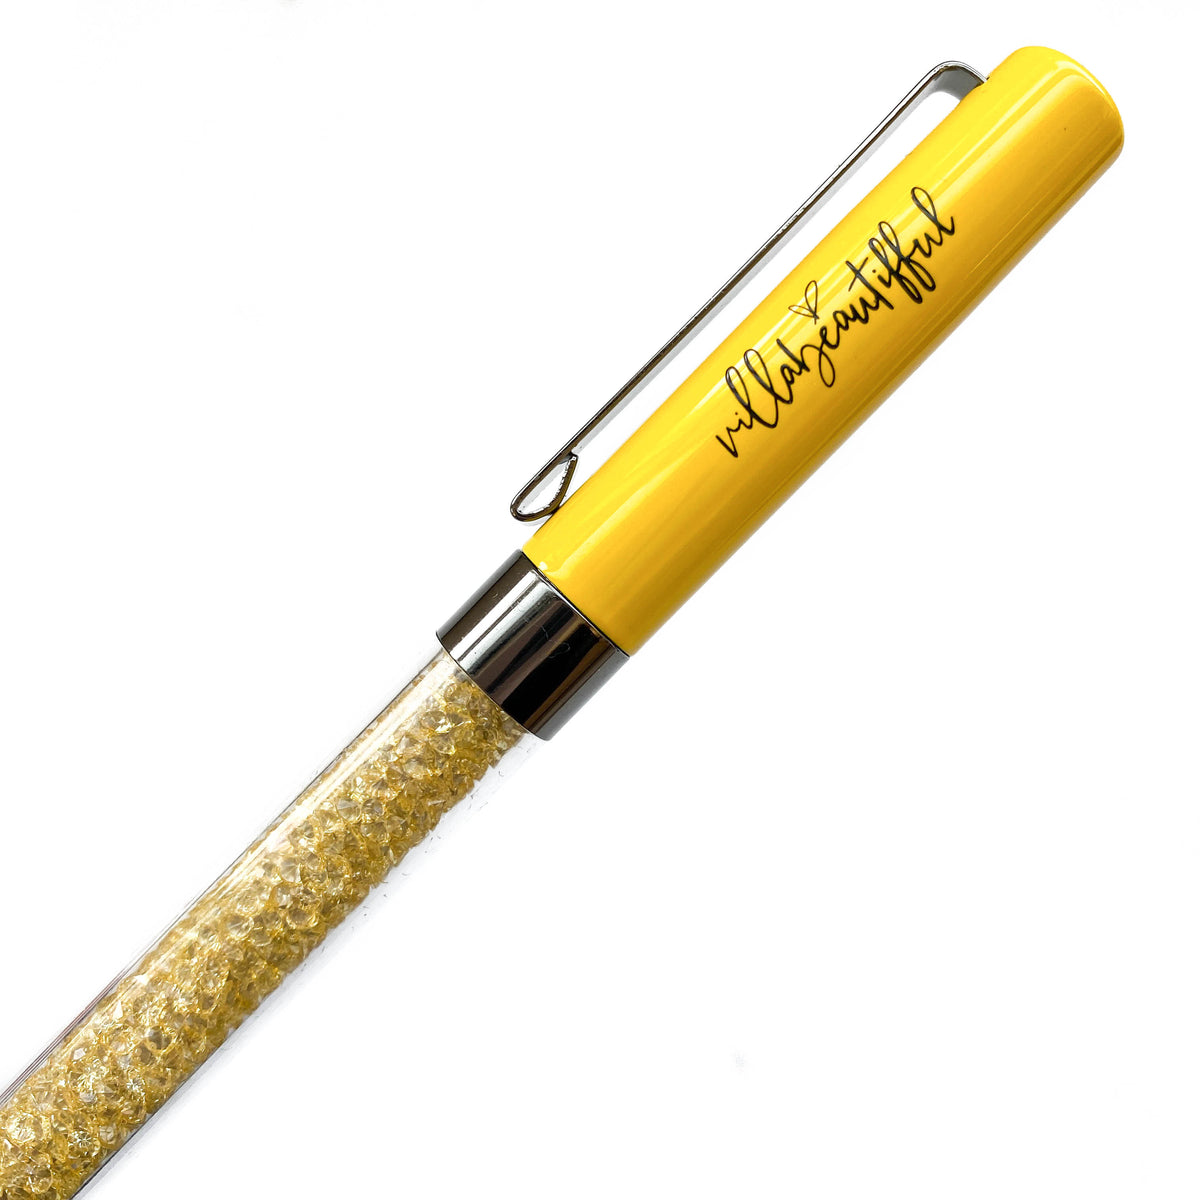 SunGlow Crystal VBPen | limited pen